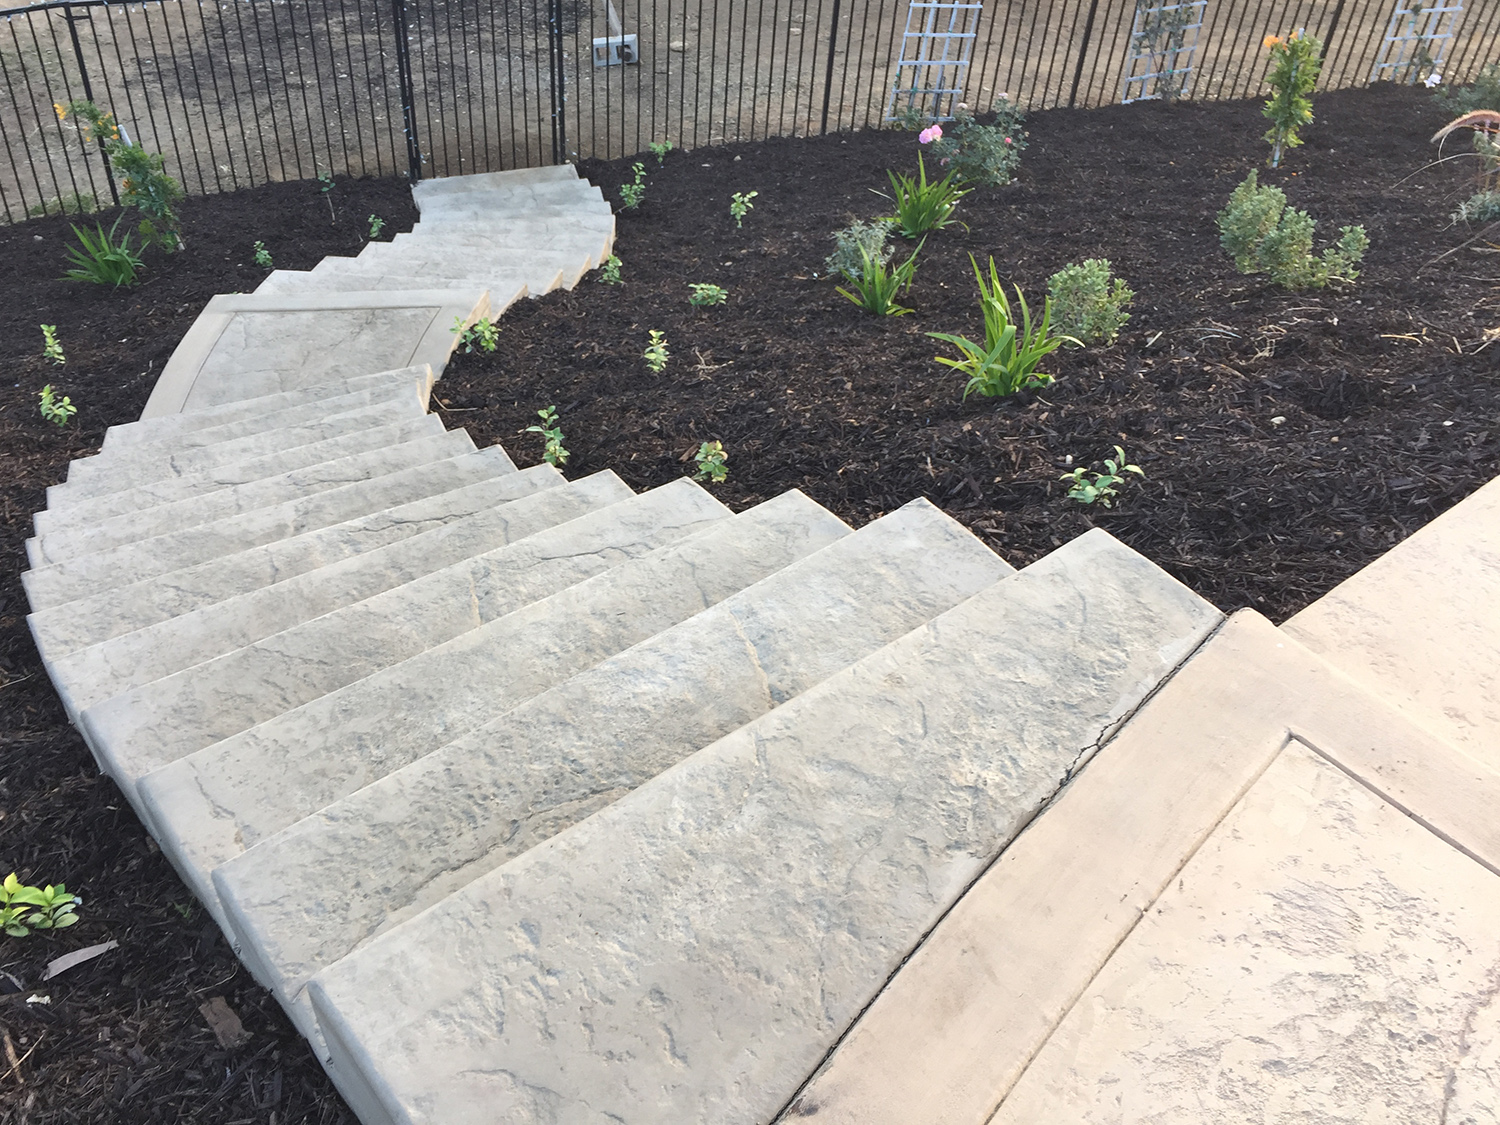 Concrete stairs on a slope